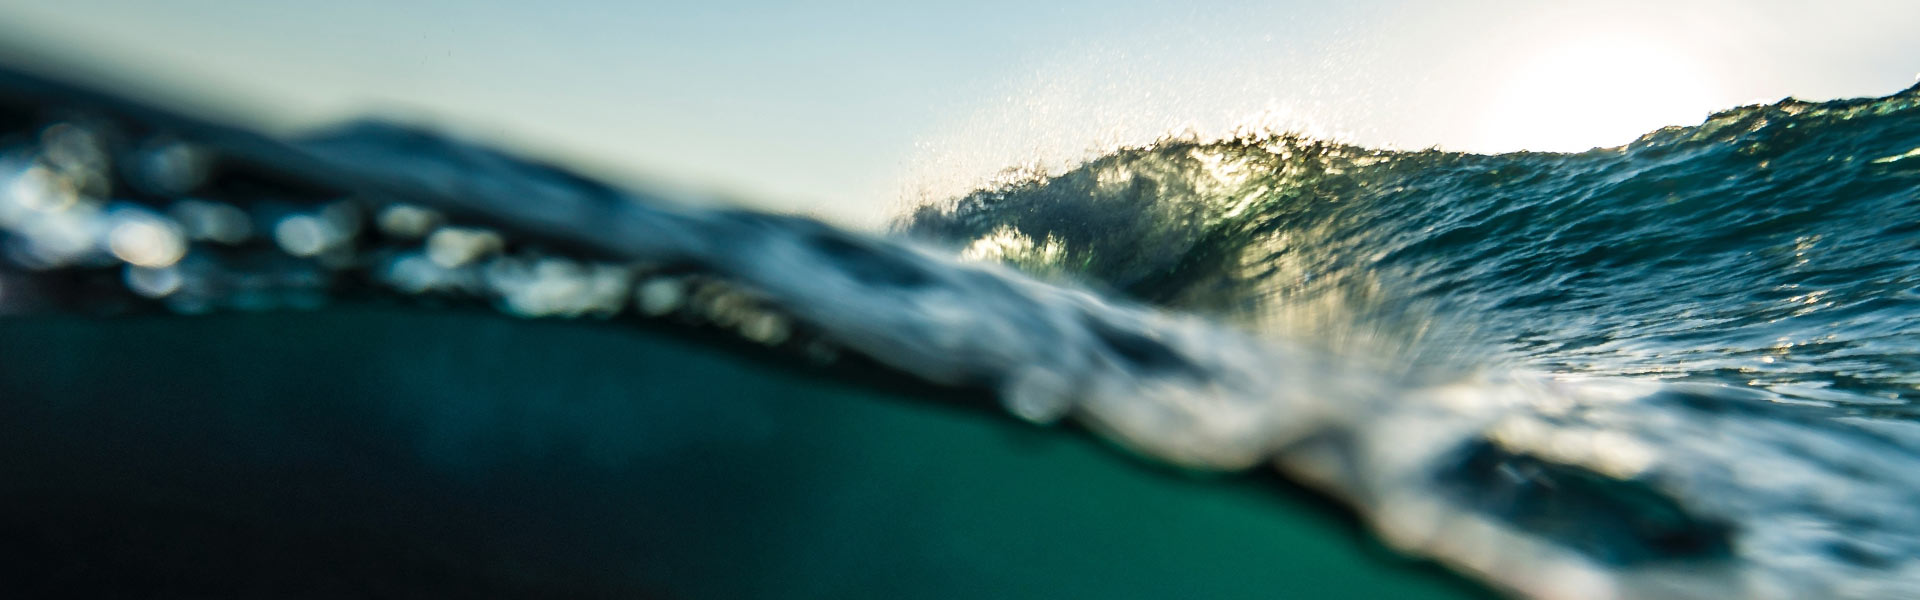 Close up image of a wave